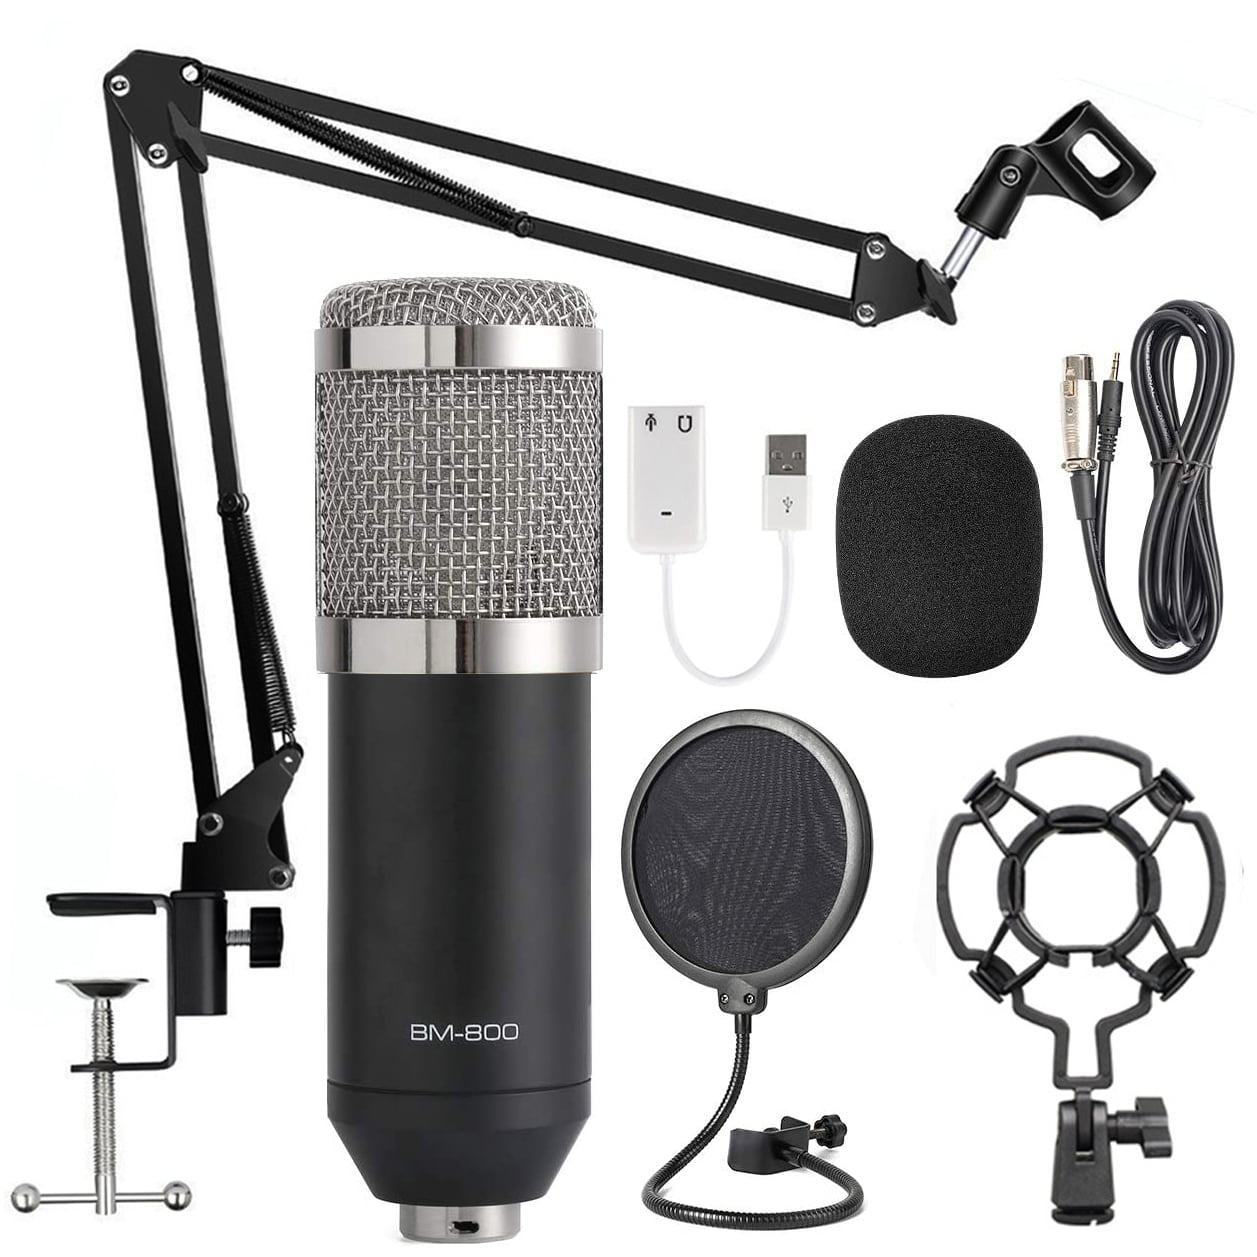 Condenser Microphone Bundle Metal Shock Mount and Double-Layer Pop Filter for Recording & Broadcasting Recording Home/Studio DJ Equipment with Live Sound Card Adjustable Mic Suspension Scissor Arm